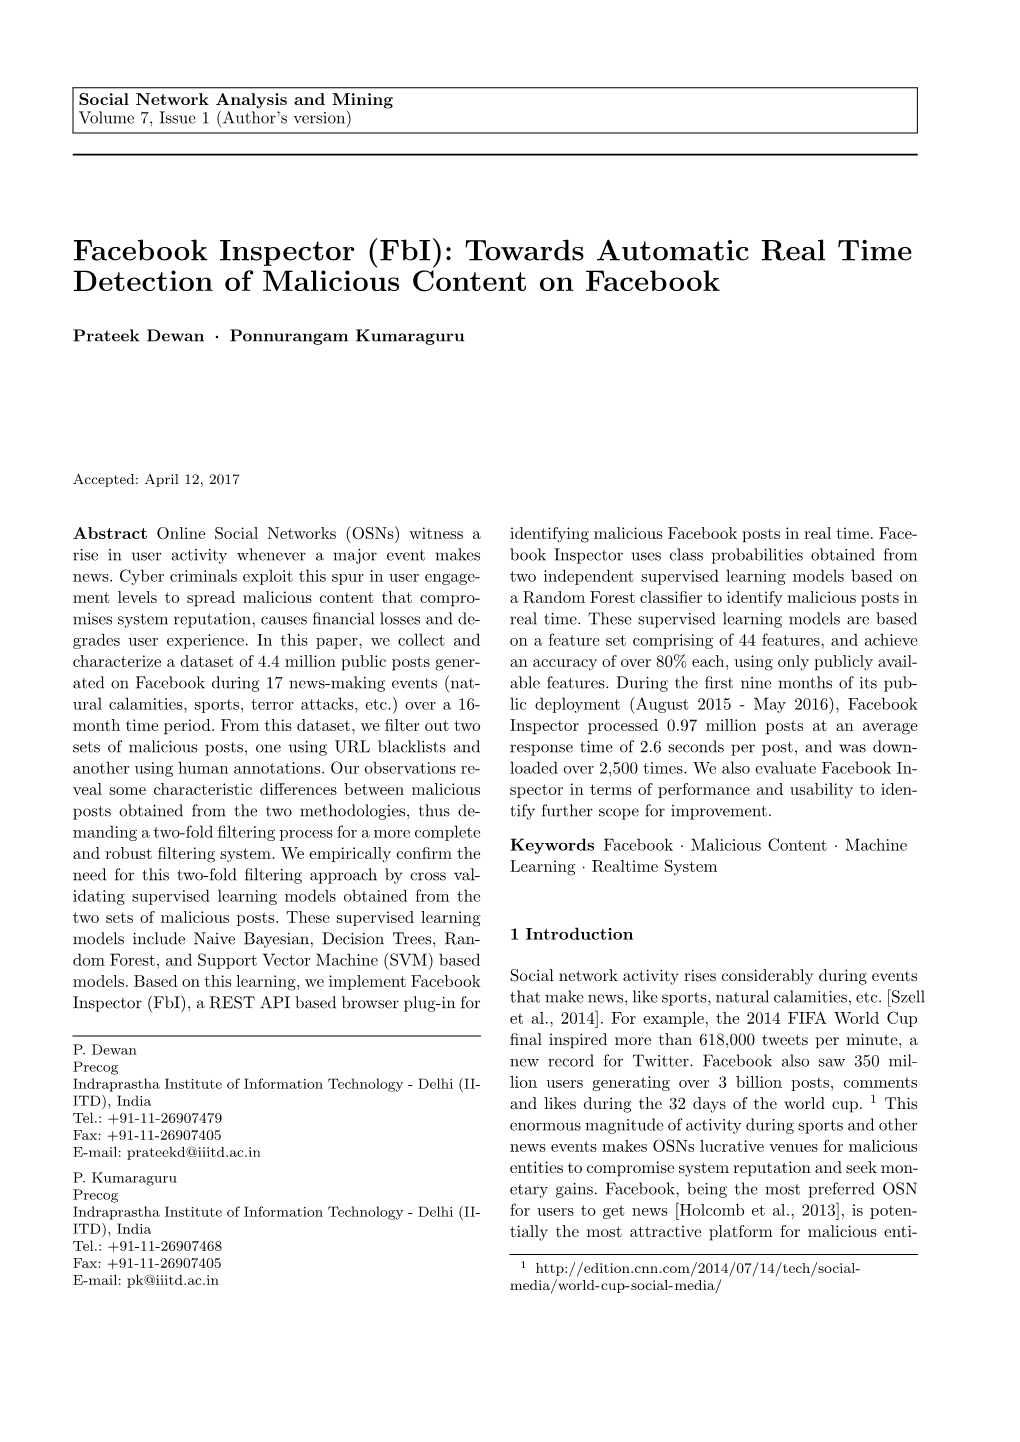 Facebook Inspector (Fbi): Towards Automatic Real Time Detection of Malicious Content on Facebook